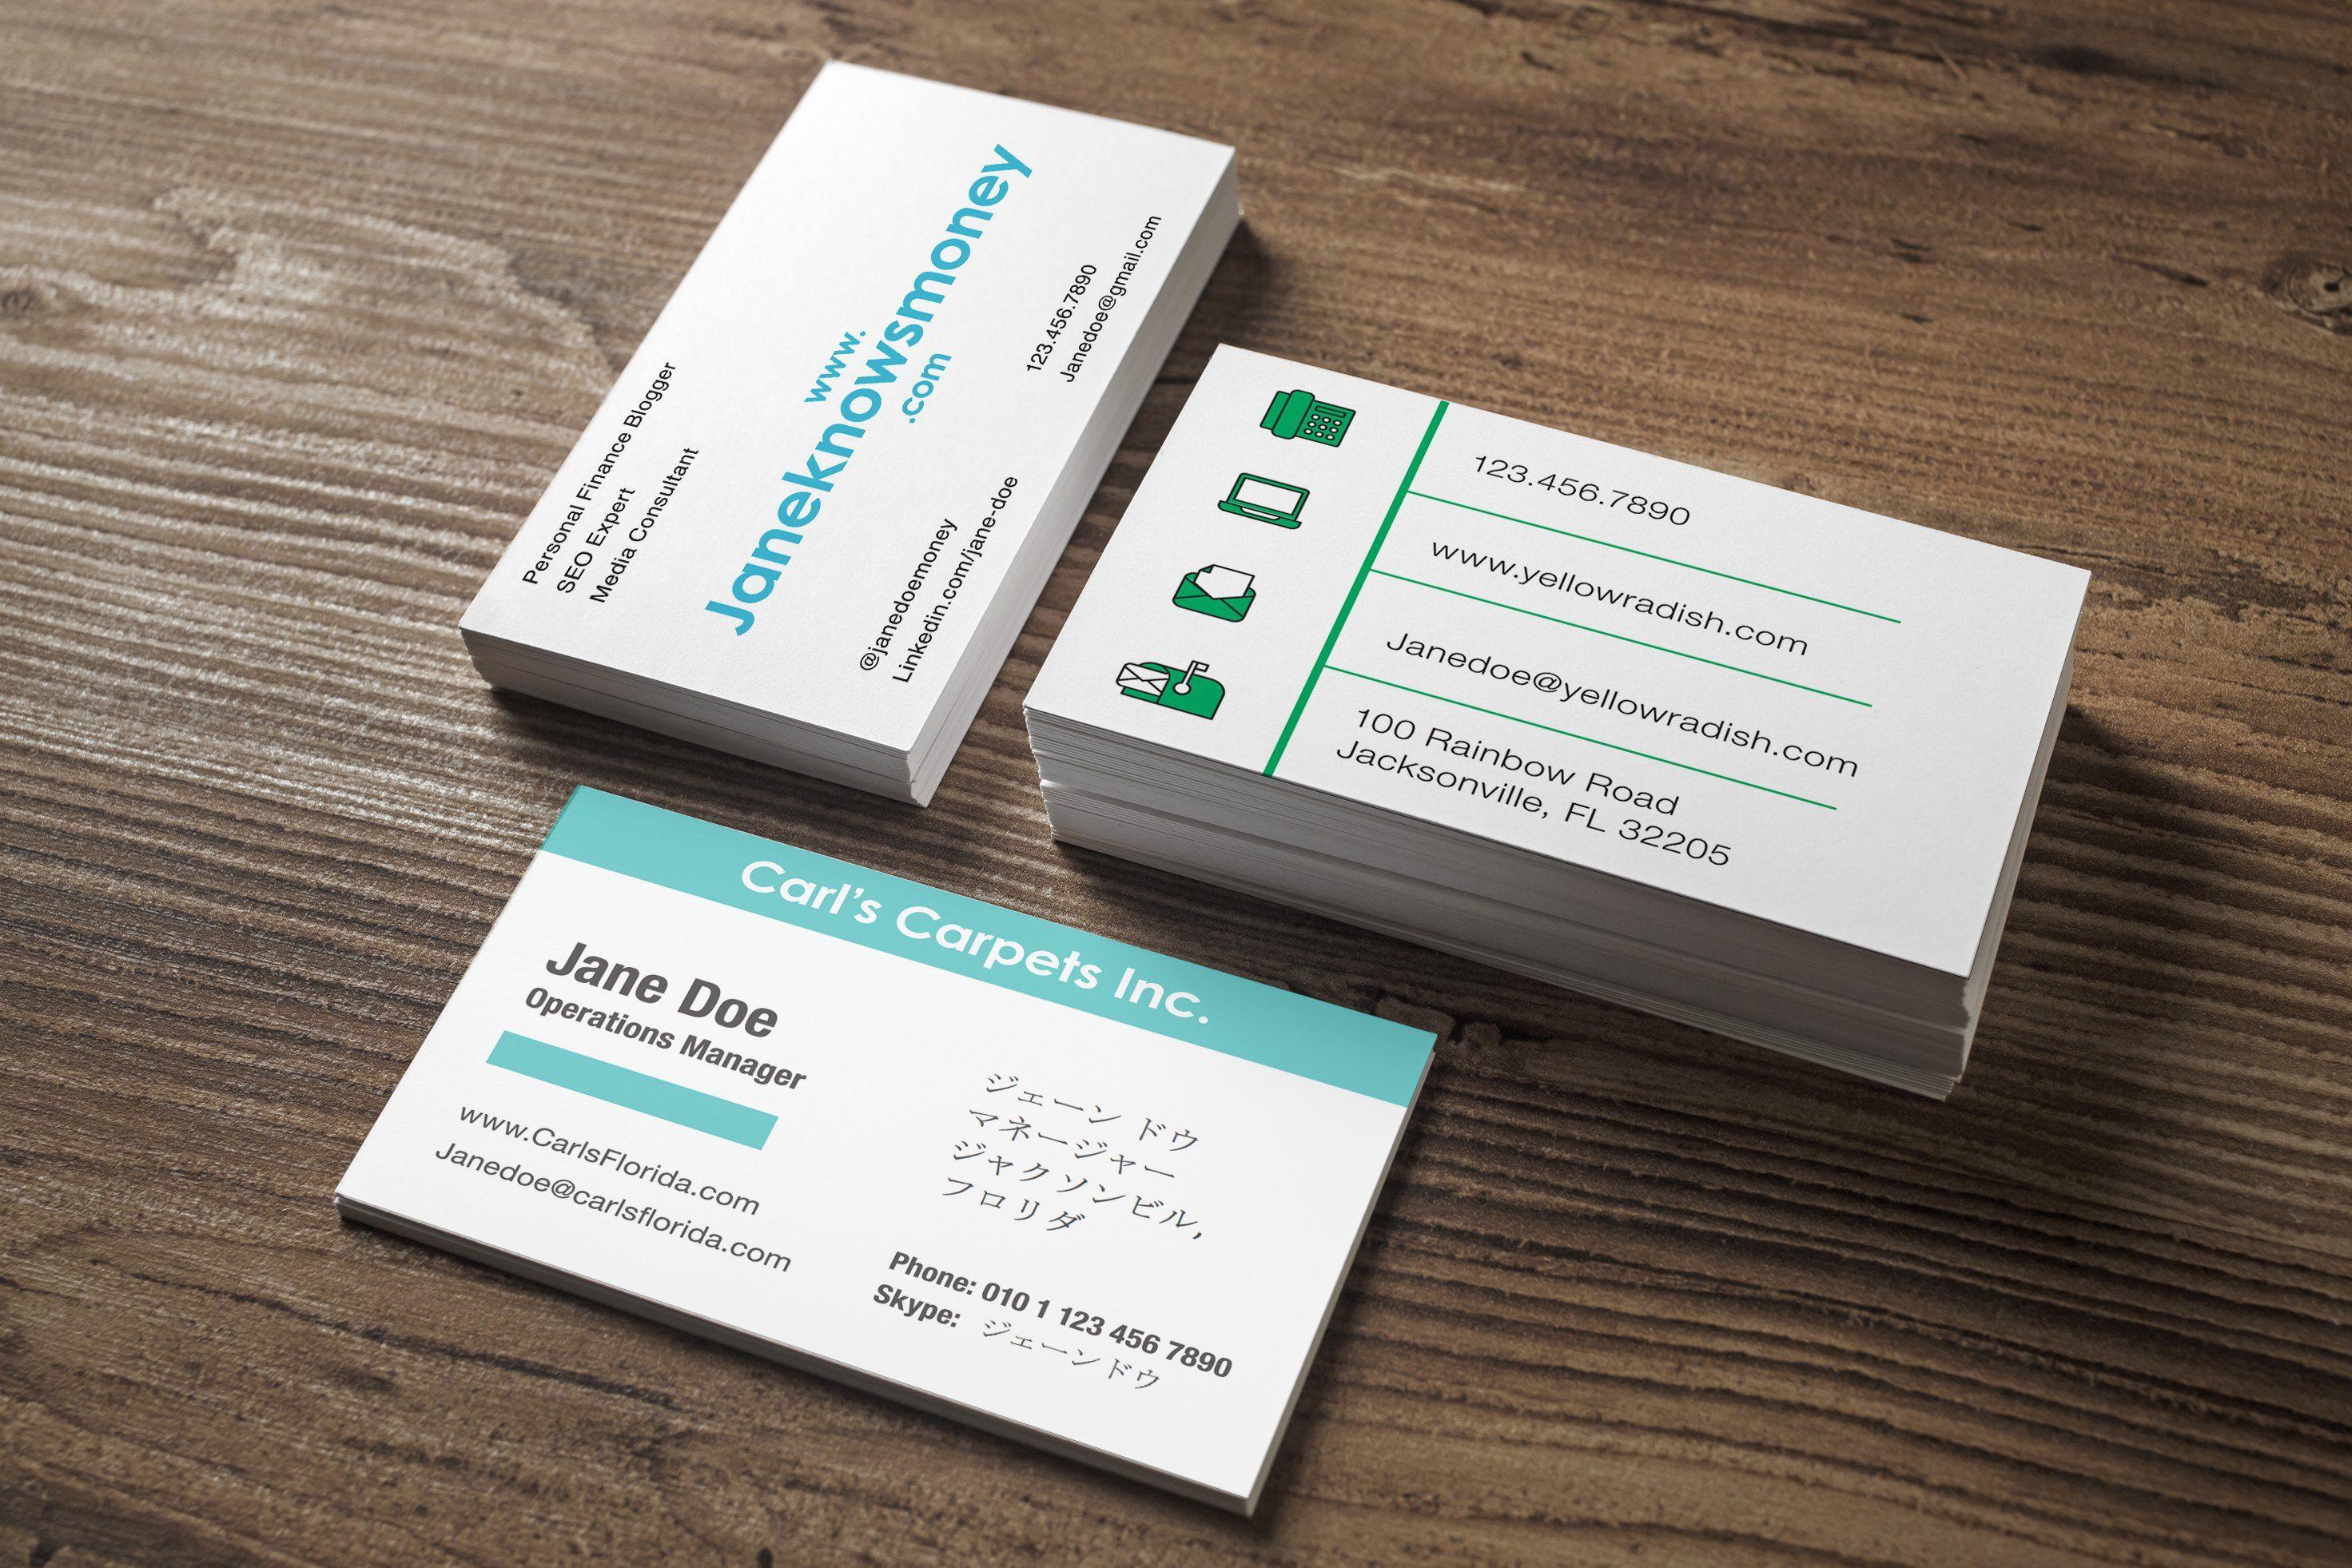 LinkedIn for Business Cards Logo - Business Card Template: How to Make a Card That Stands Out